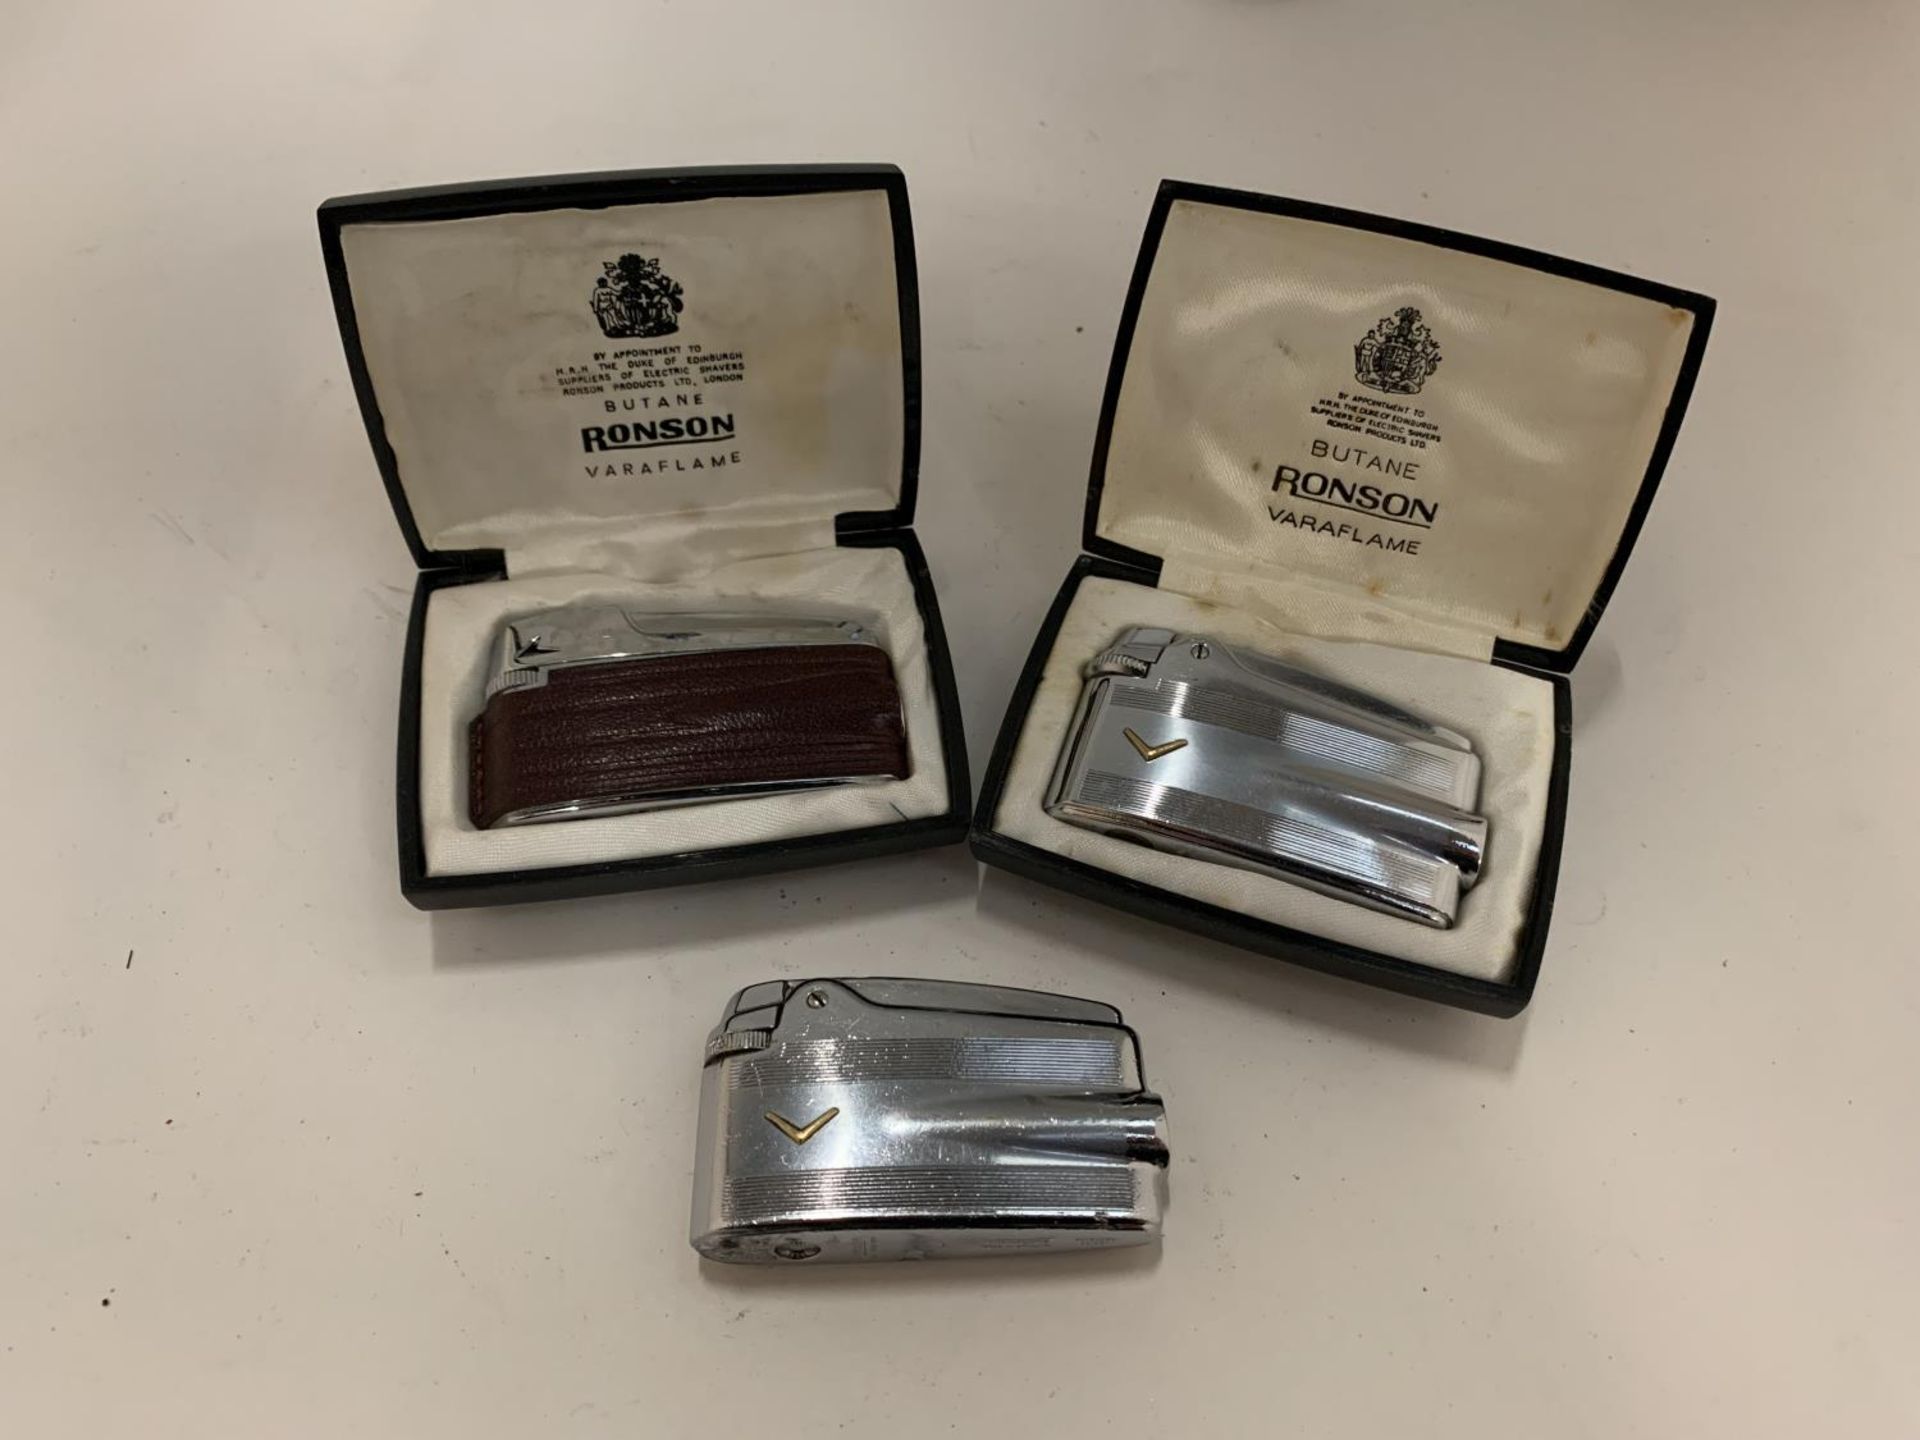 THREE RONSON LIGHTERS, TWO OF WHICH ARE BOXED